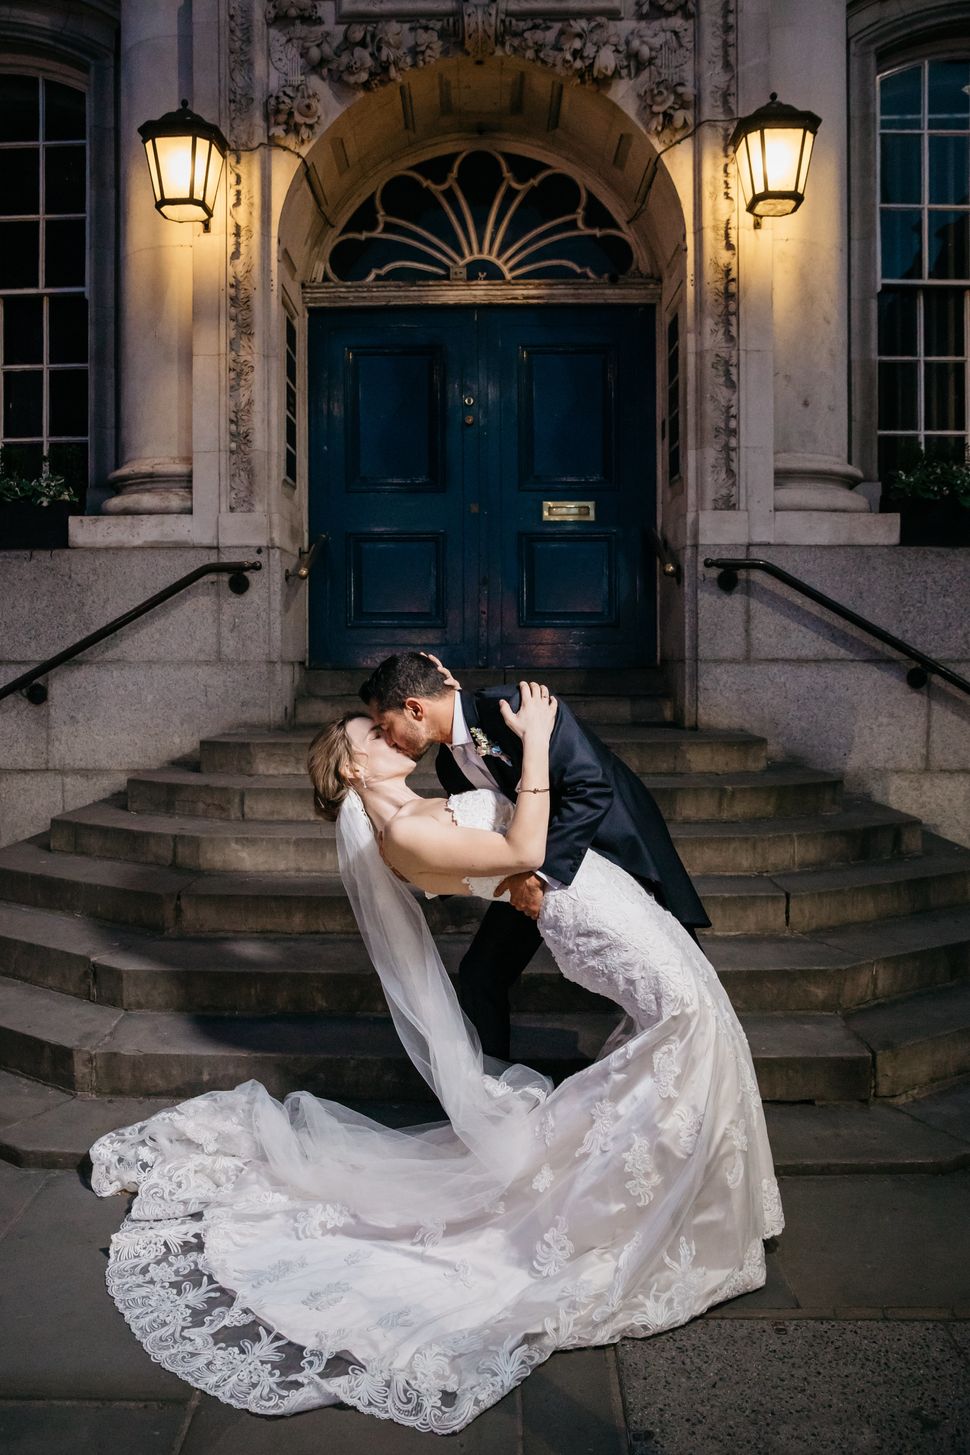 The couple shared a selection of image from their wedding exclusively with HuffPost UK.